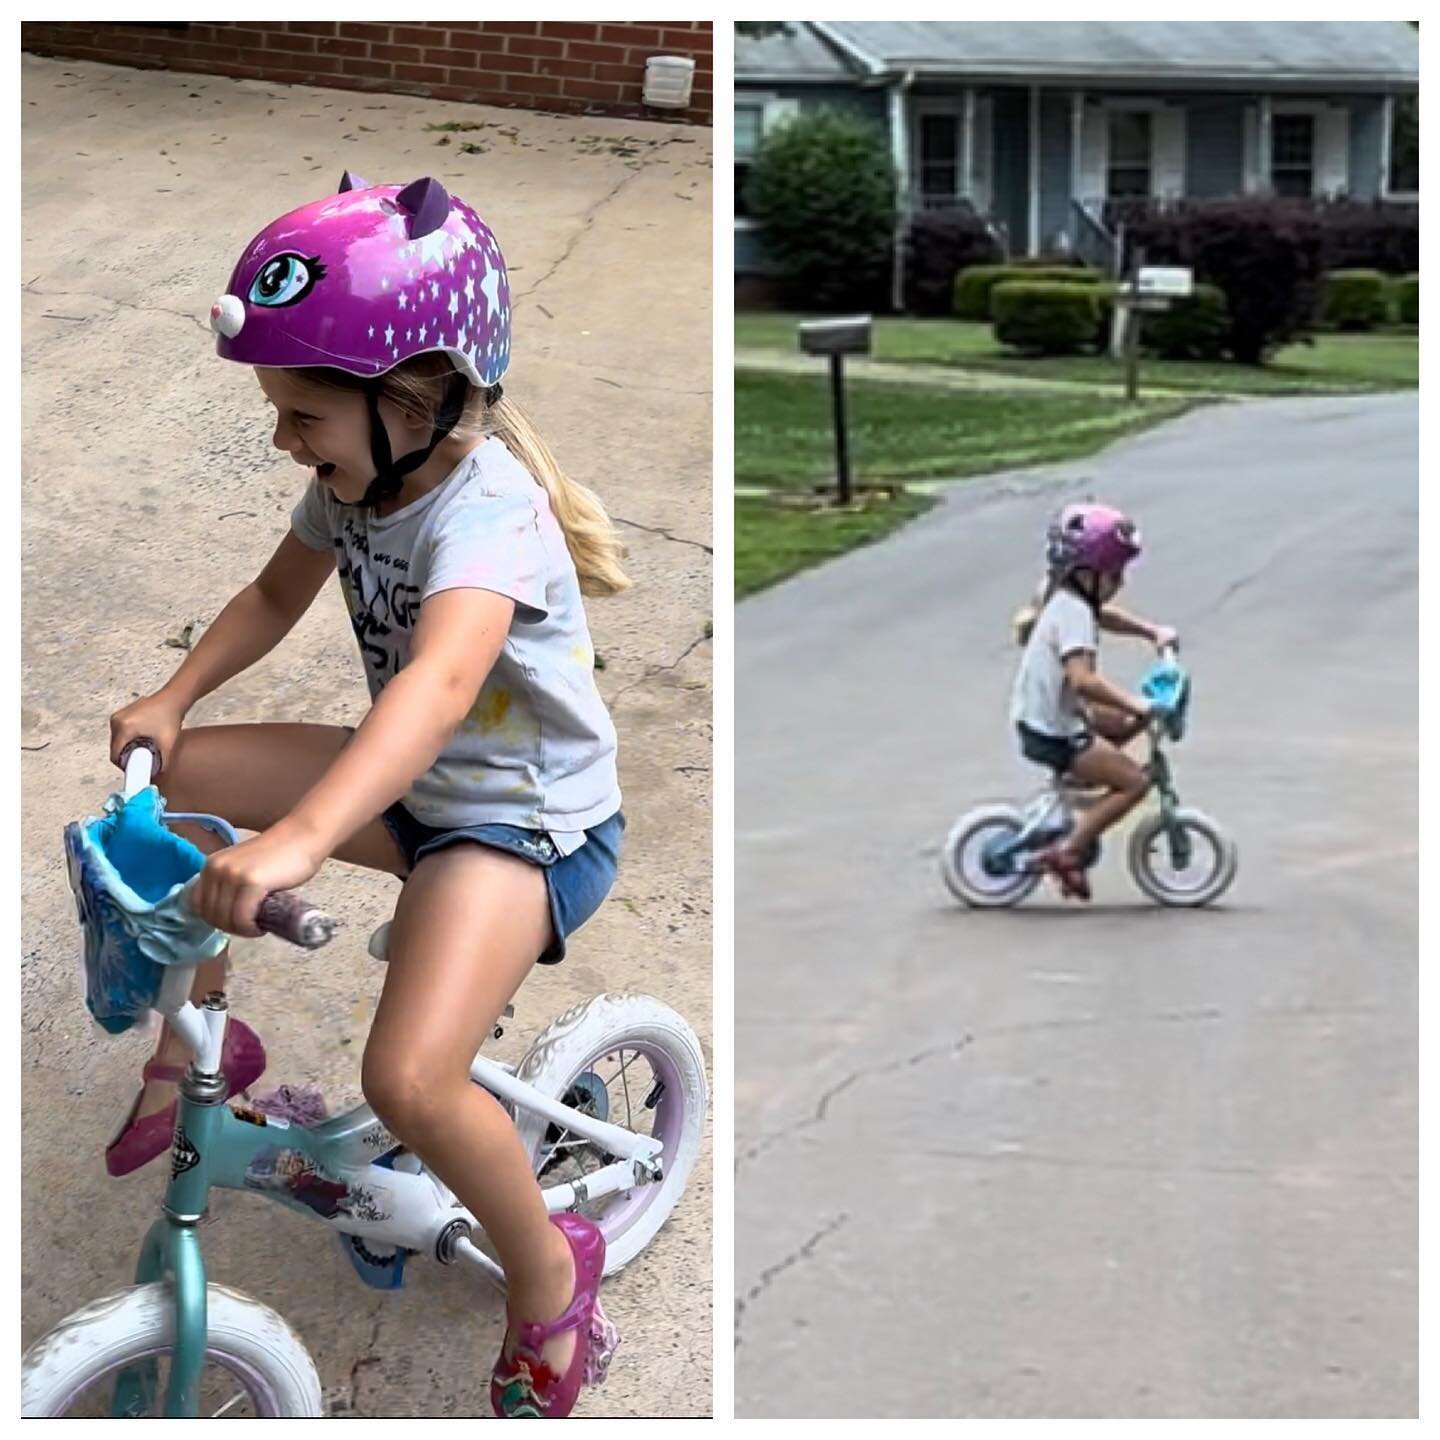 She&rsquo;s fallen and scraped her knees, run into the house, my car, and a mailbox &hellip; but she kept getting back on the bike - absolutely DETERMINED to ride without training wheels, and tonight she took off down the street with the biggest of s